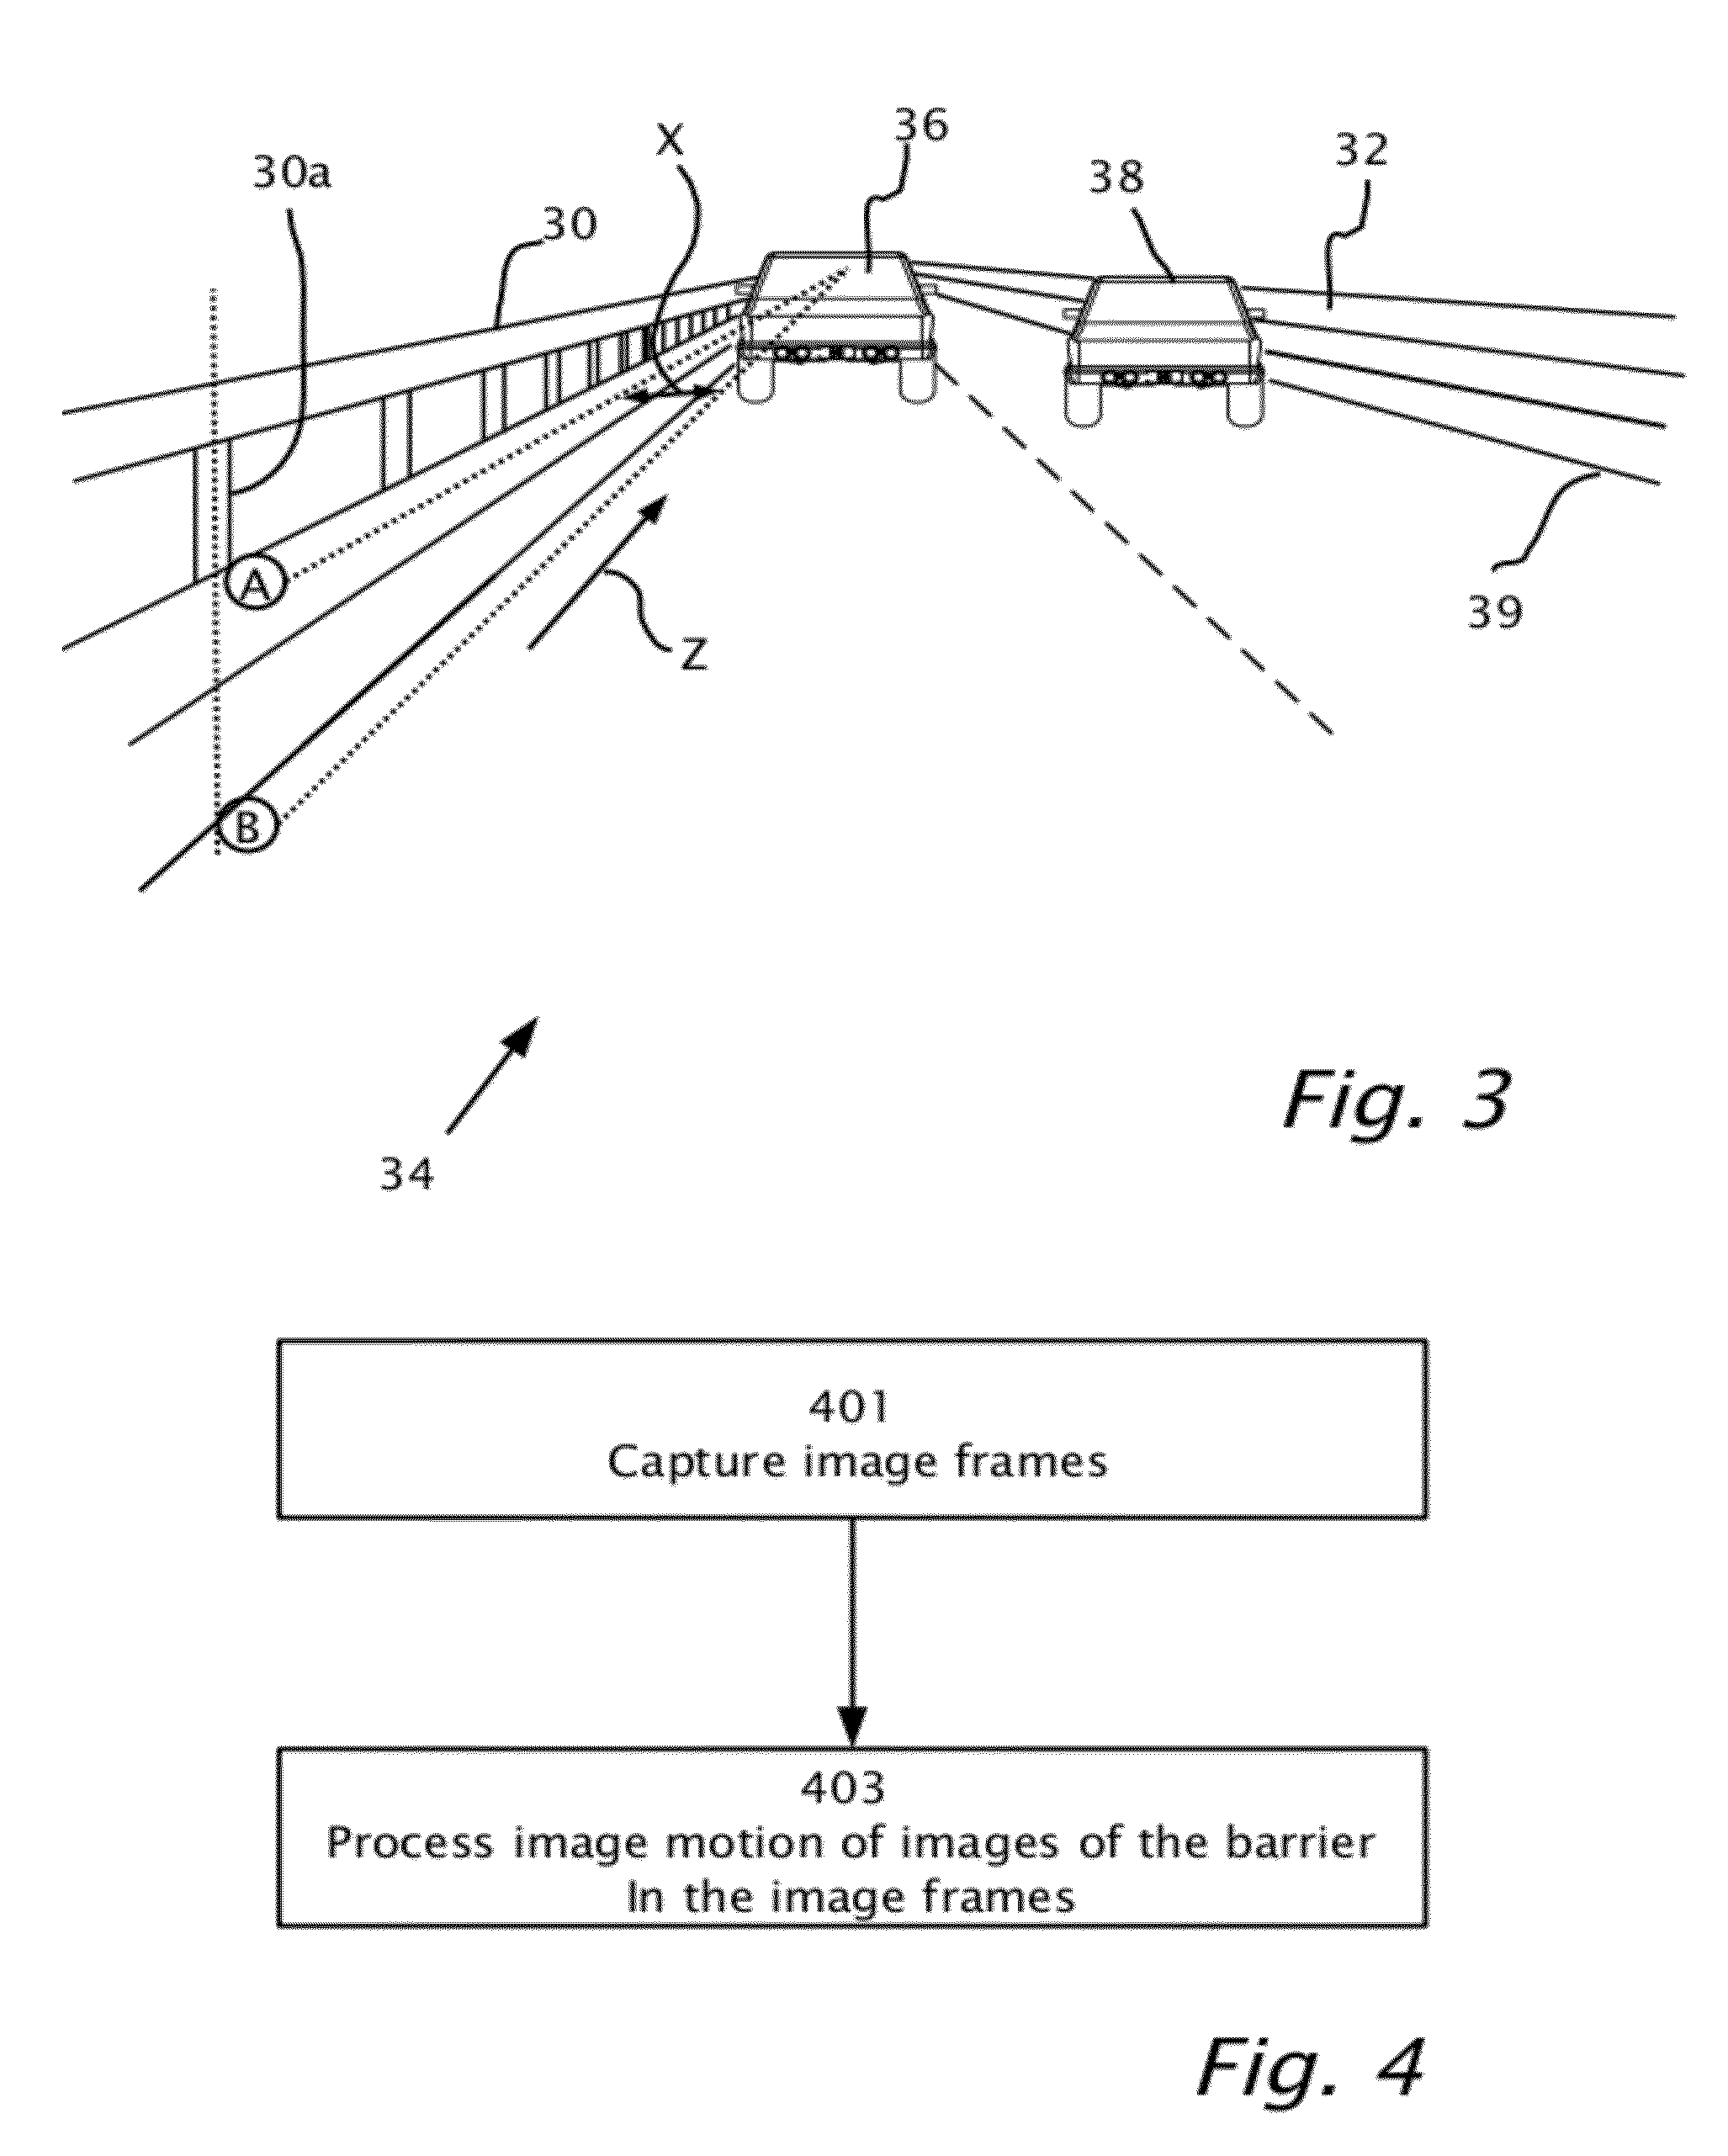 Barrier and guardrail detection using a single camera